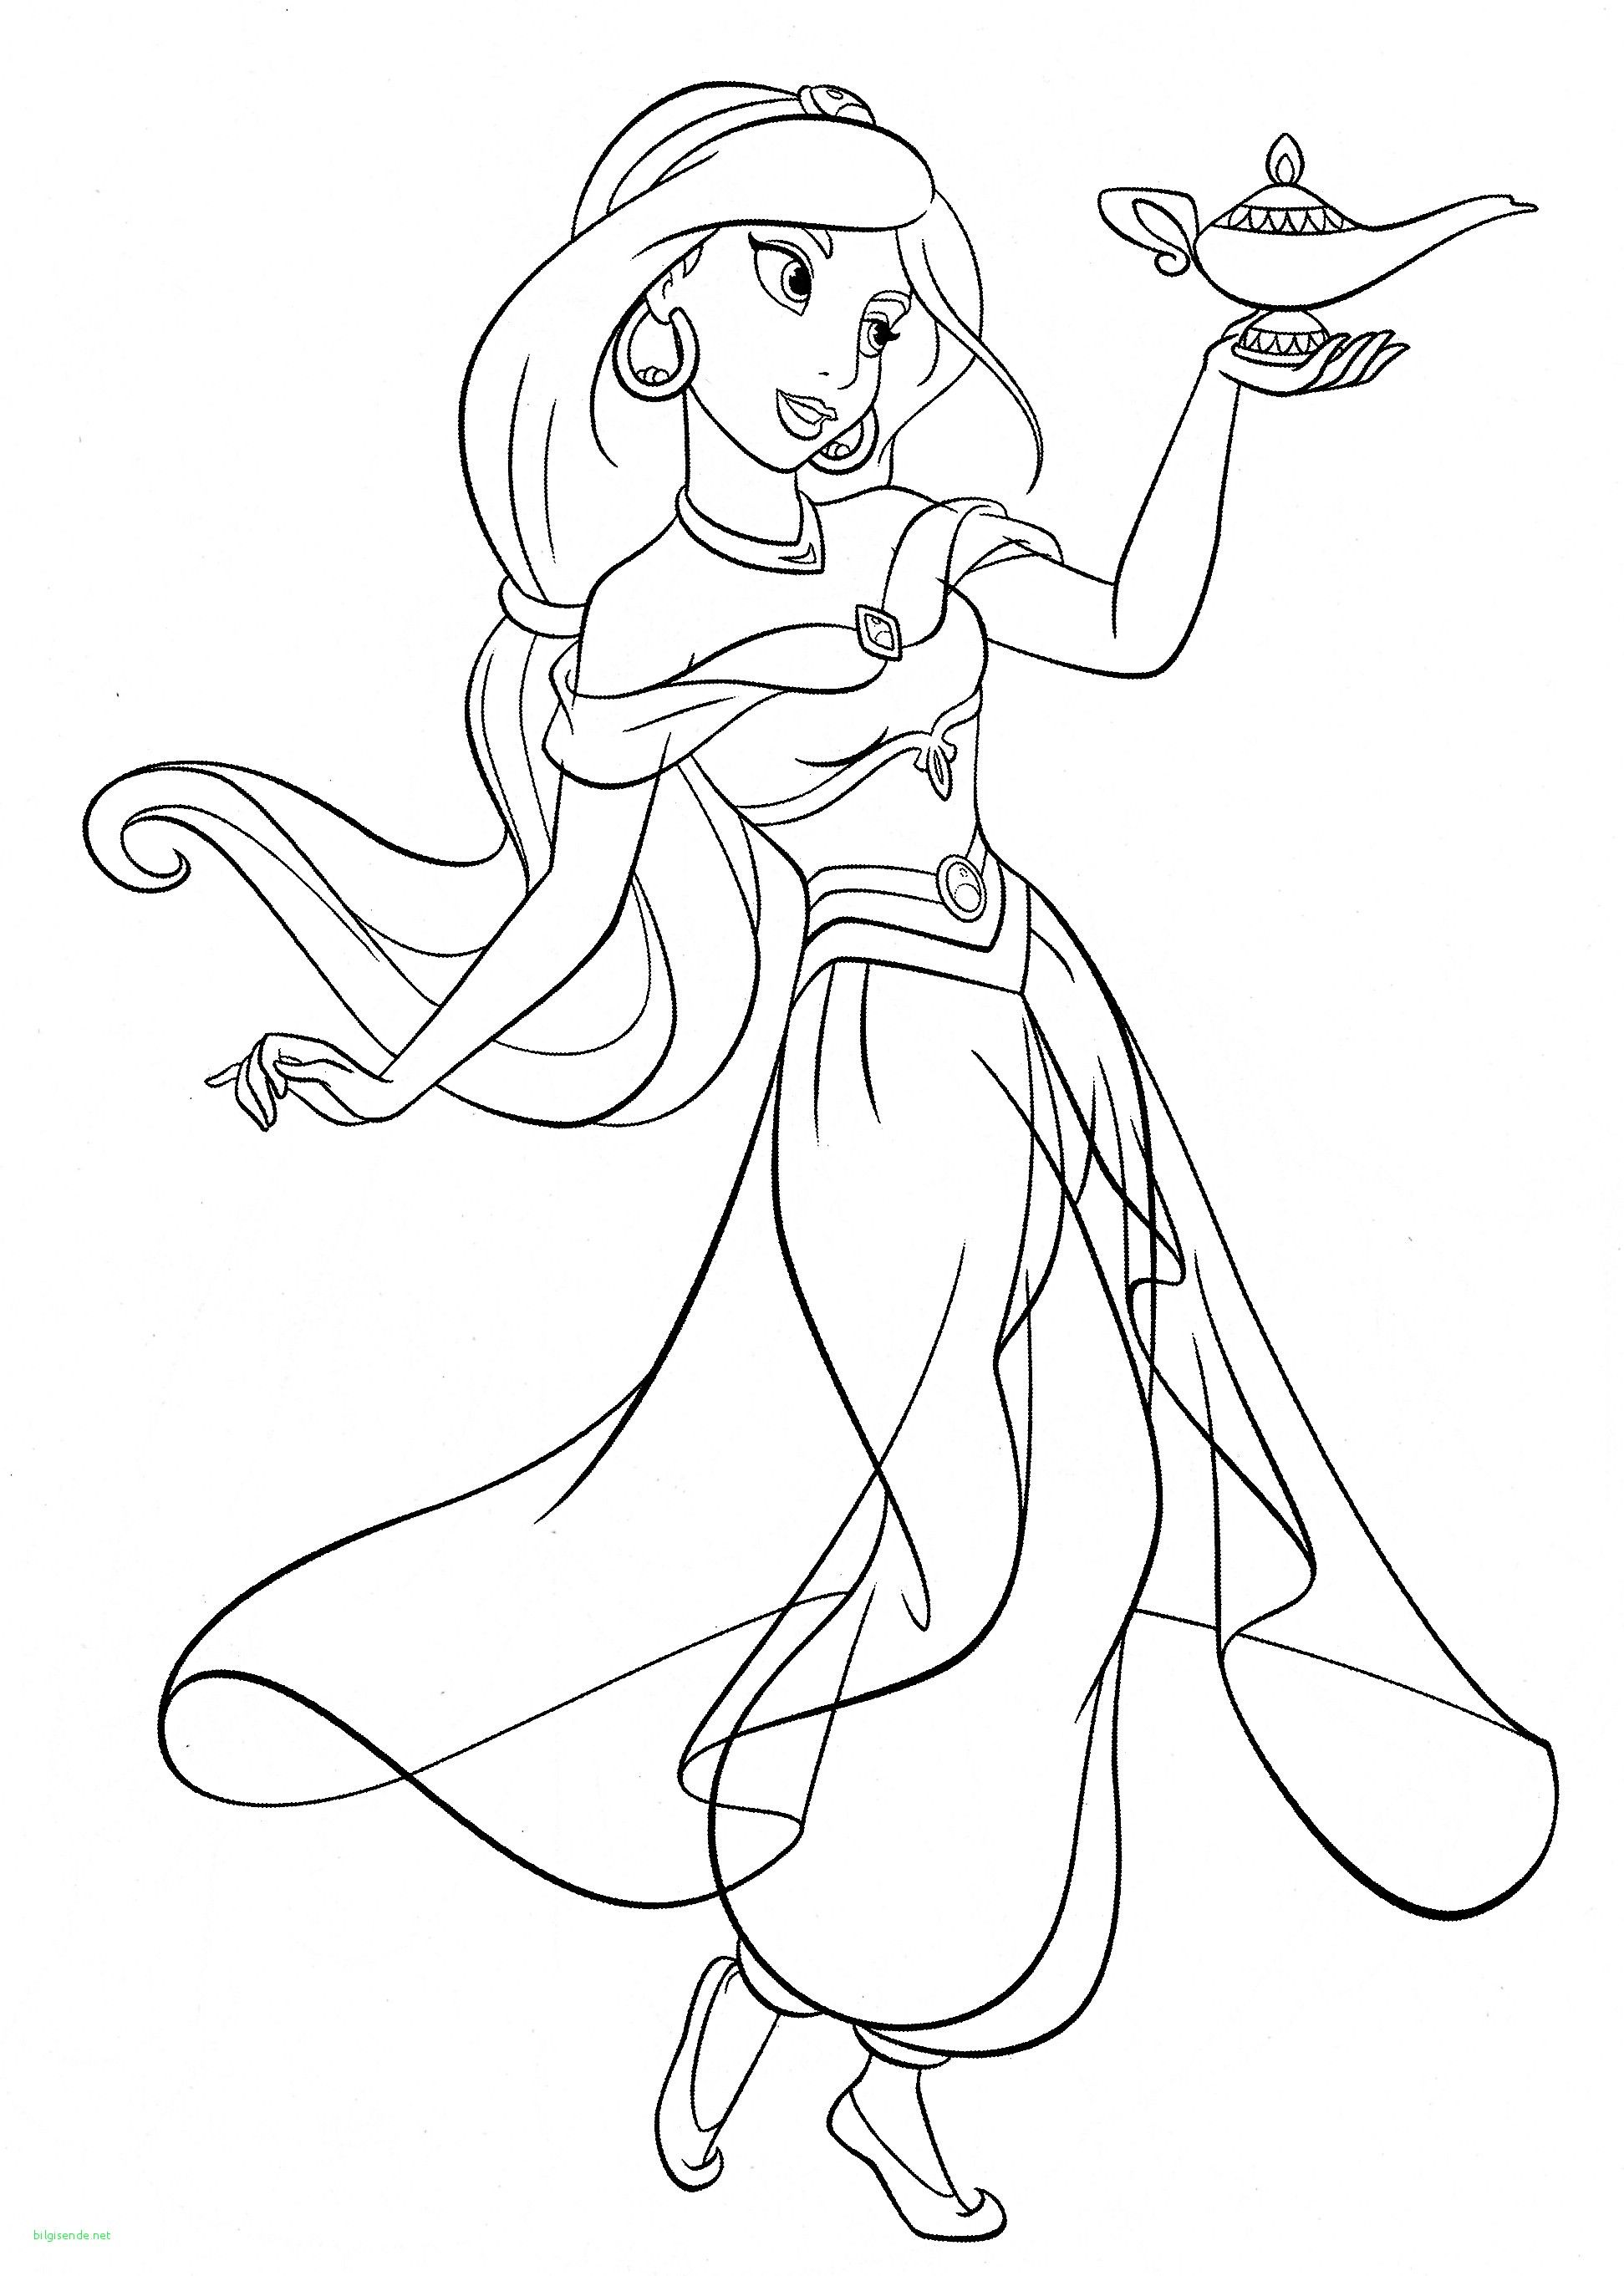 Disney princess coloring pages jasmine â from the thousand photos on the web with â disney princess coloring pages cartoon coloring pages disney princess colors